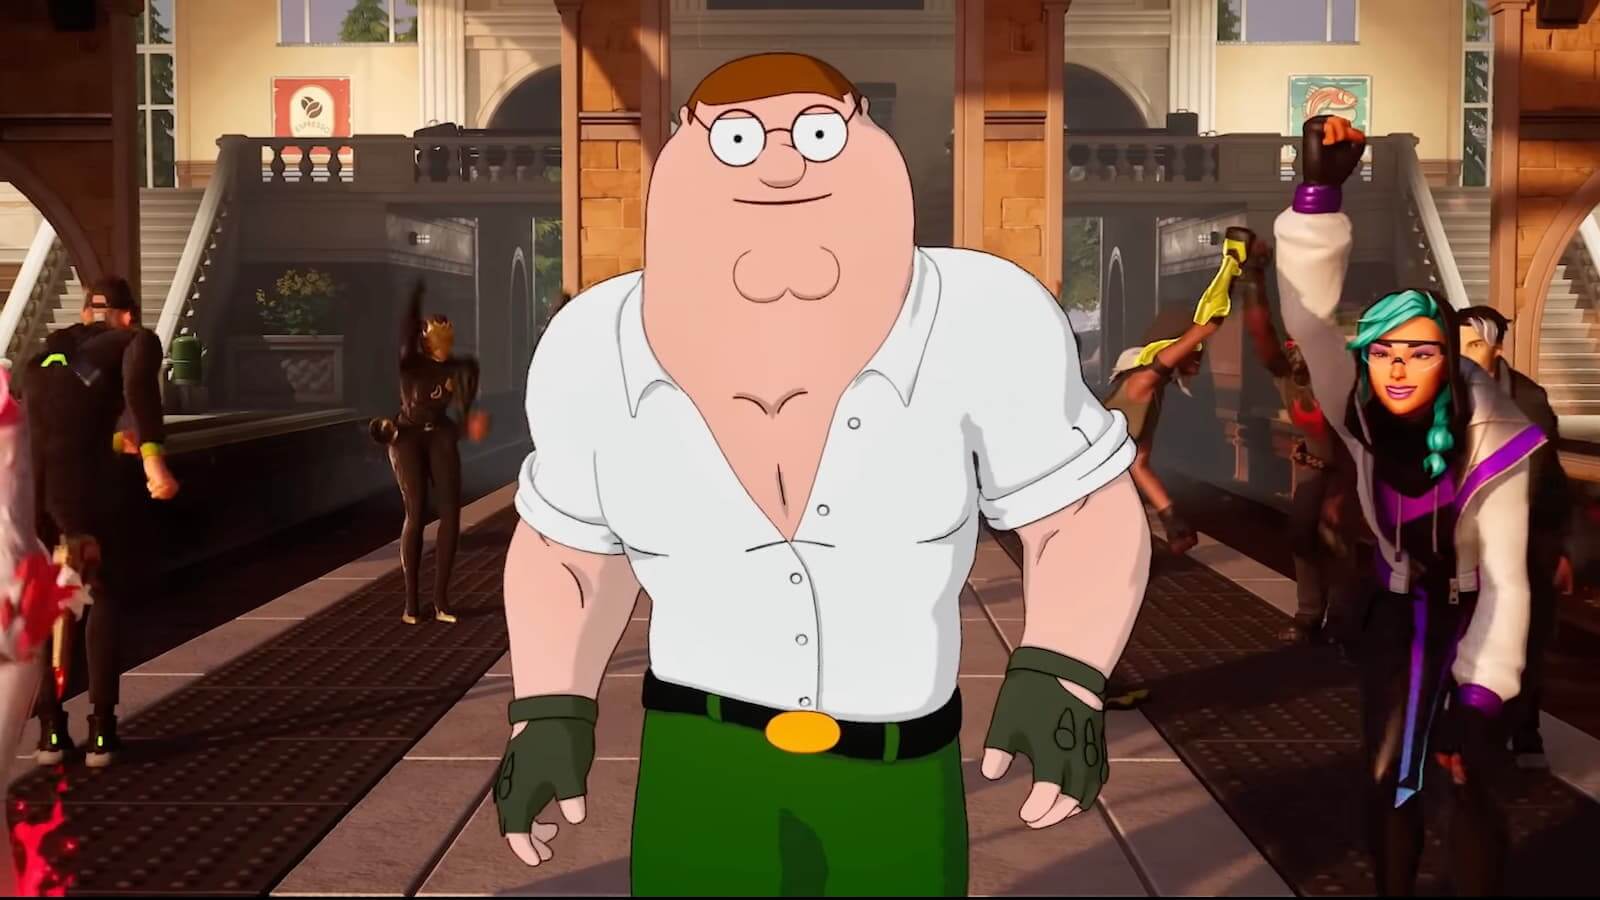 Fortnite players in awe of how hot "GigaChad" Peter Griffin is